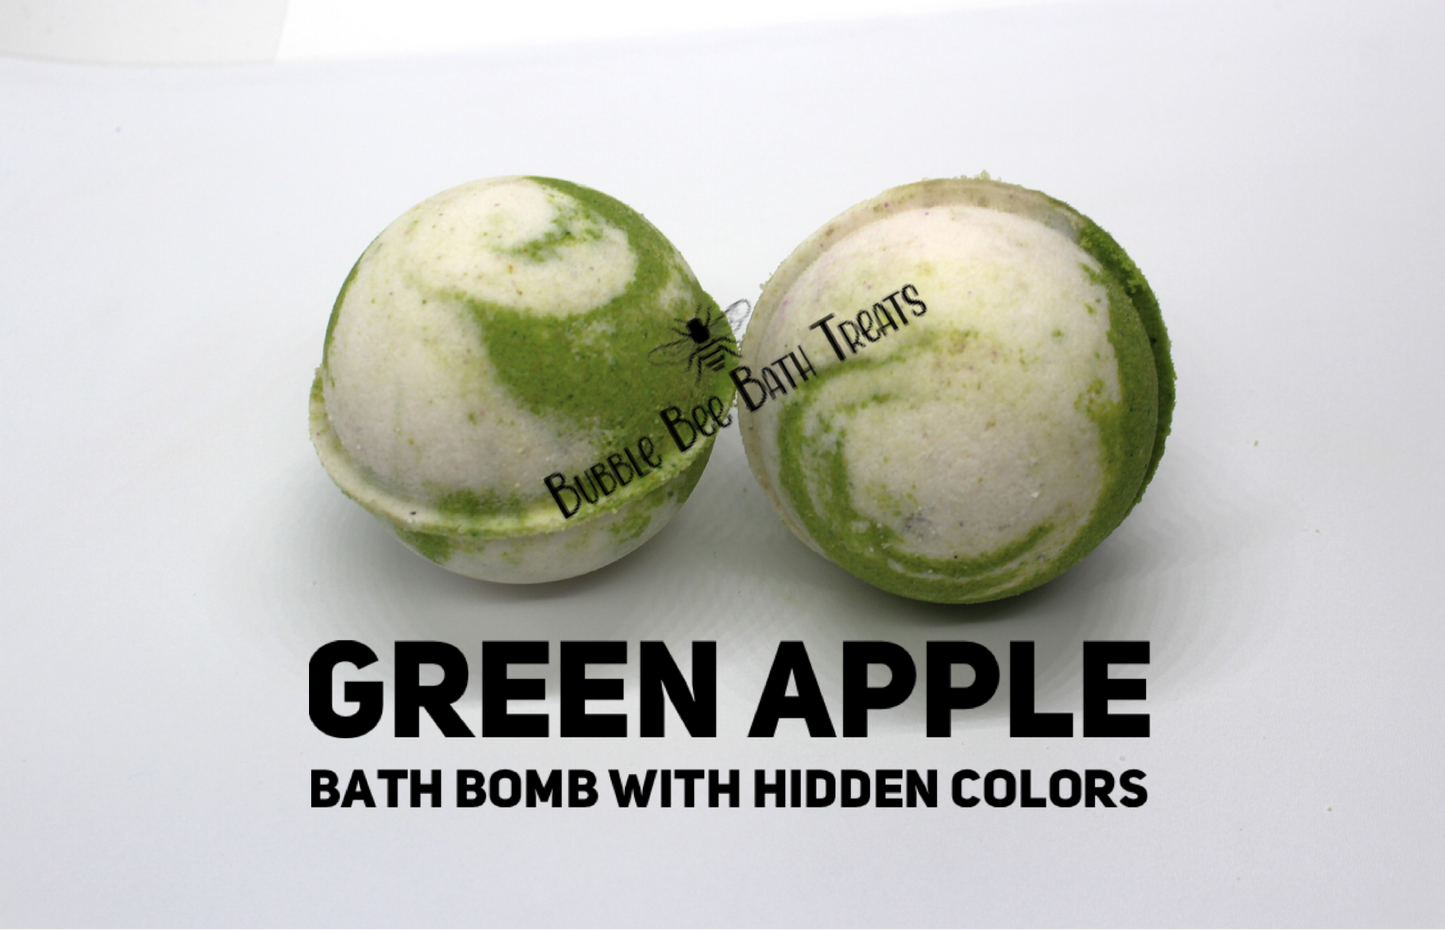 Green Apple Bath Bomb with hidden colors 2.5 inch Round